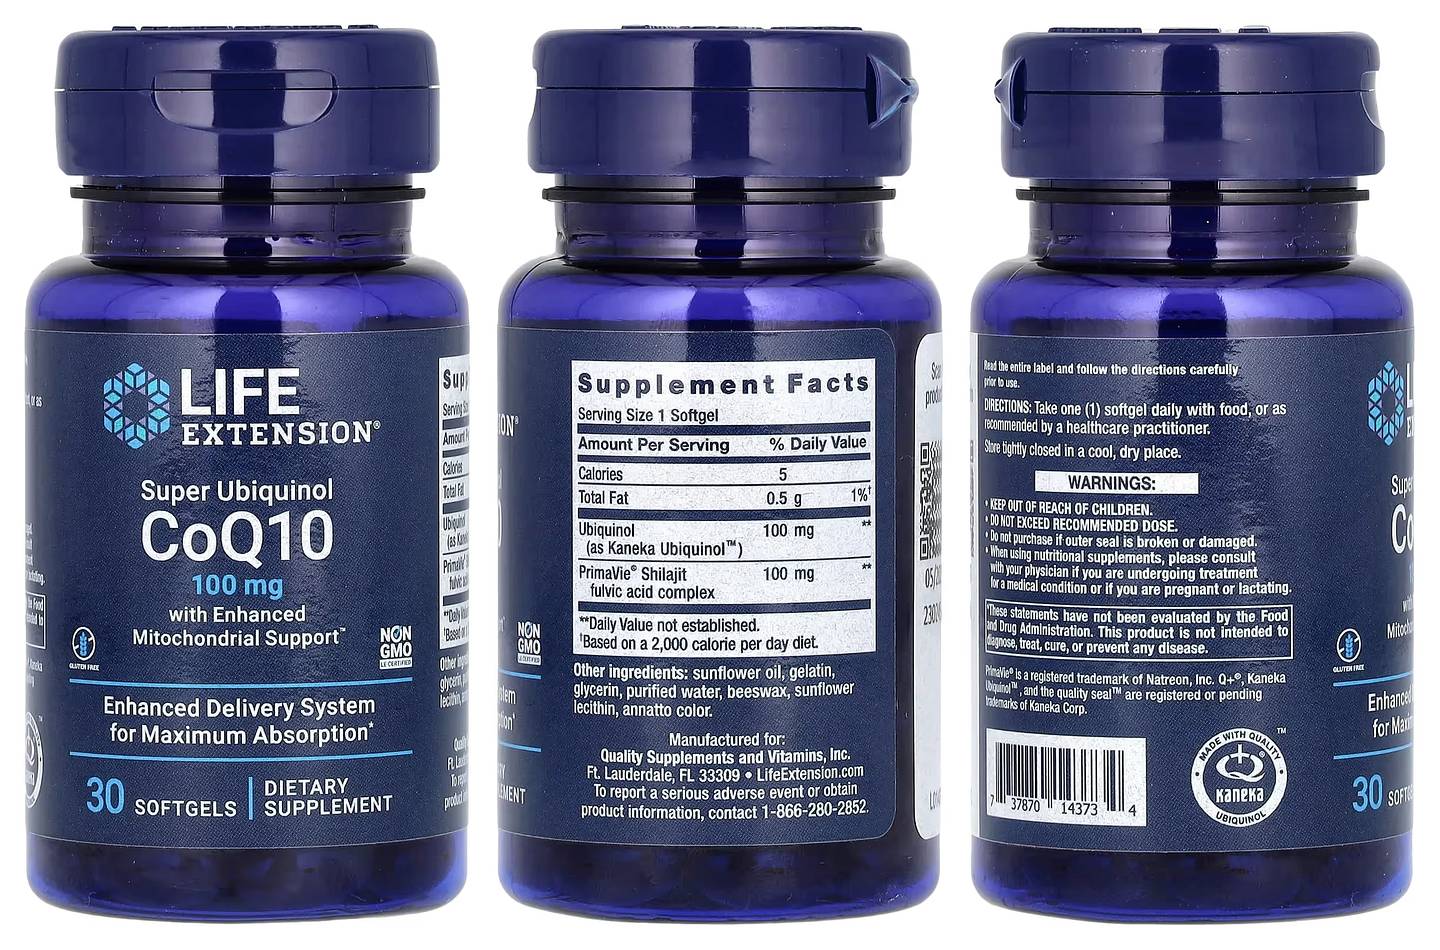 Life Extension, Super Ubiquinol CoQ10 with Enhanced Mitochondrial Support packaging